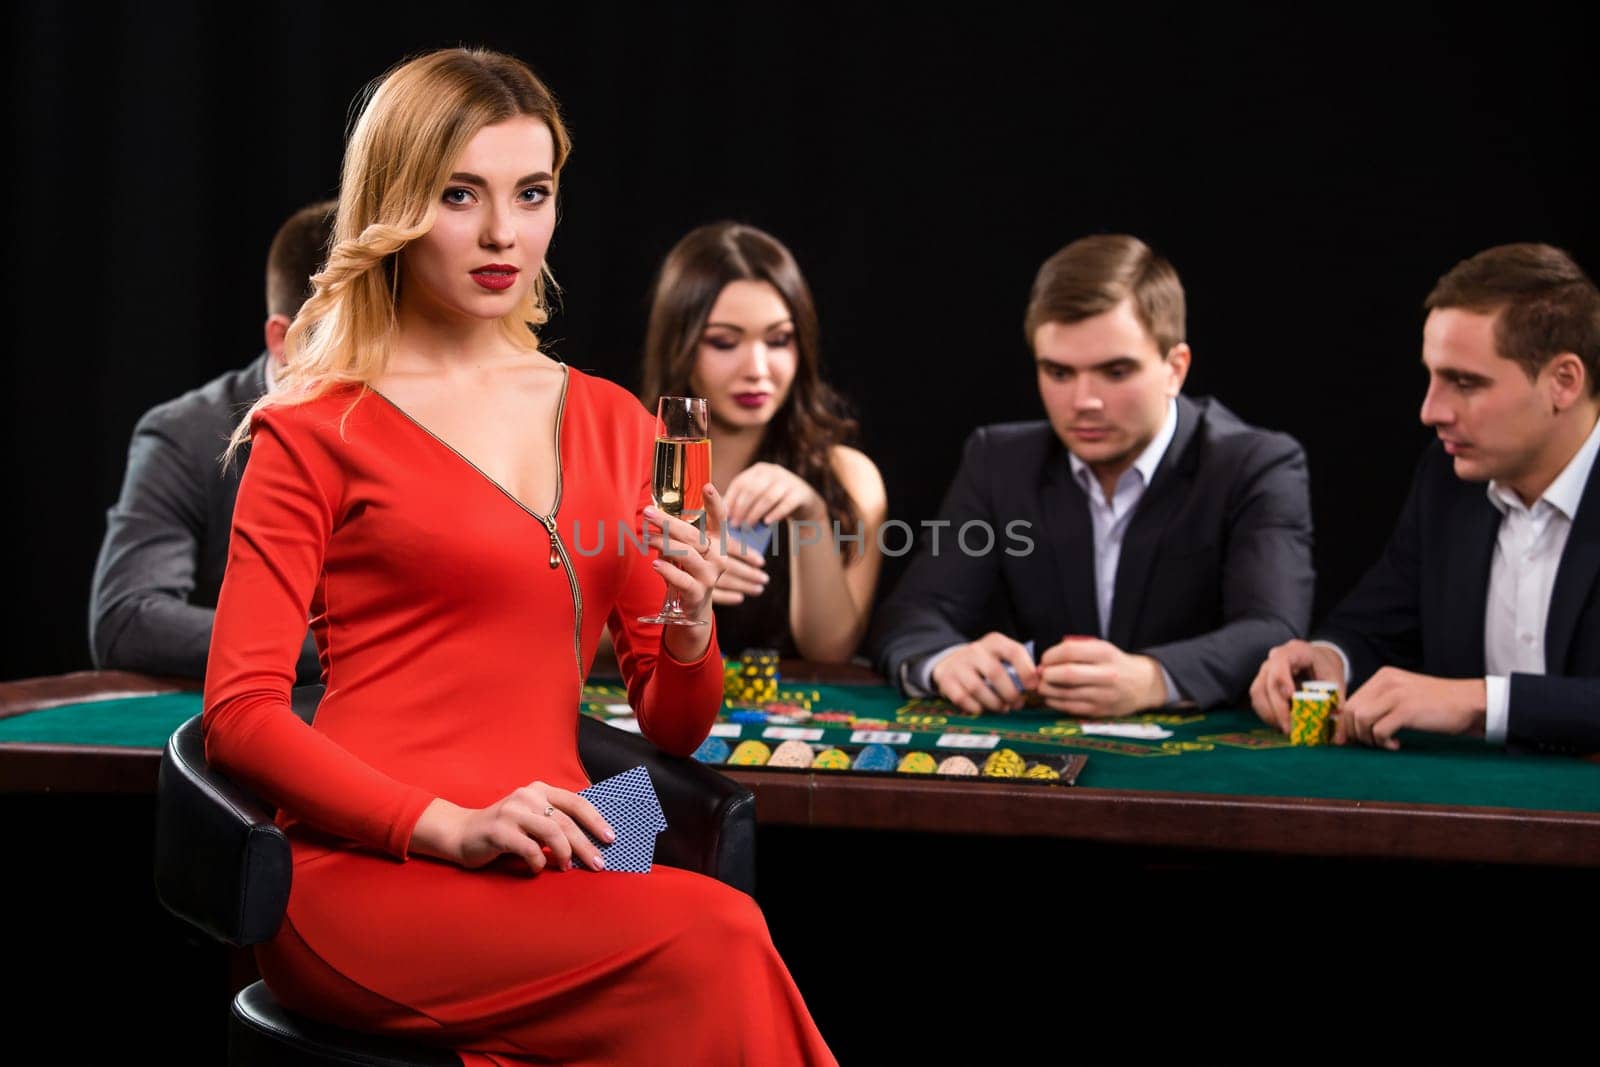 Young people playing poker at the table. Luxury women in dresses with a glass of champagne in hand sitting in the foreground. Casino